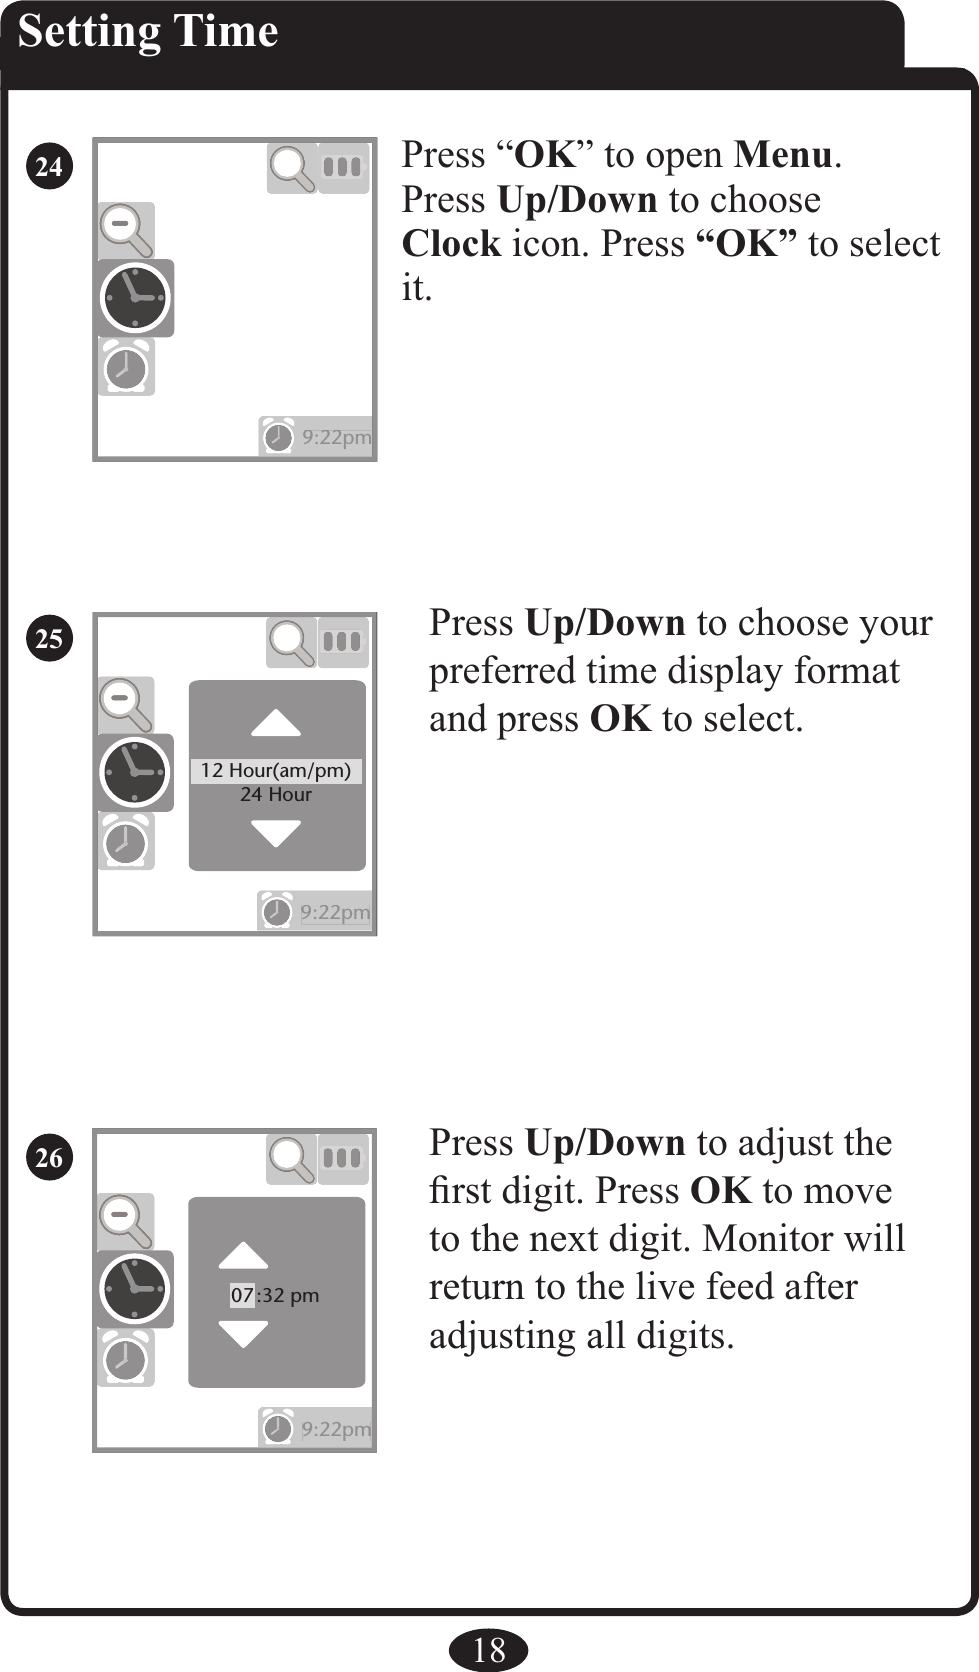 9:22pm9:22pm9:22pm9:22pm12 Hour(am/pm)24 HourPress Up/Down to choose your preferred time display format and press OK to select.Press Up/Down to adjust the ﬁrst digit. Press OK to move to the next digit. Monitor will return to the live feed after adjusting all digits. 18Press “OK” to open Menu.Press Up/Down to chooseClock icon. Press “OK” to select it.Setting Time269:22pm9:22pm07:32 pm2524